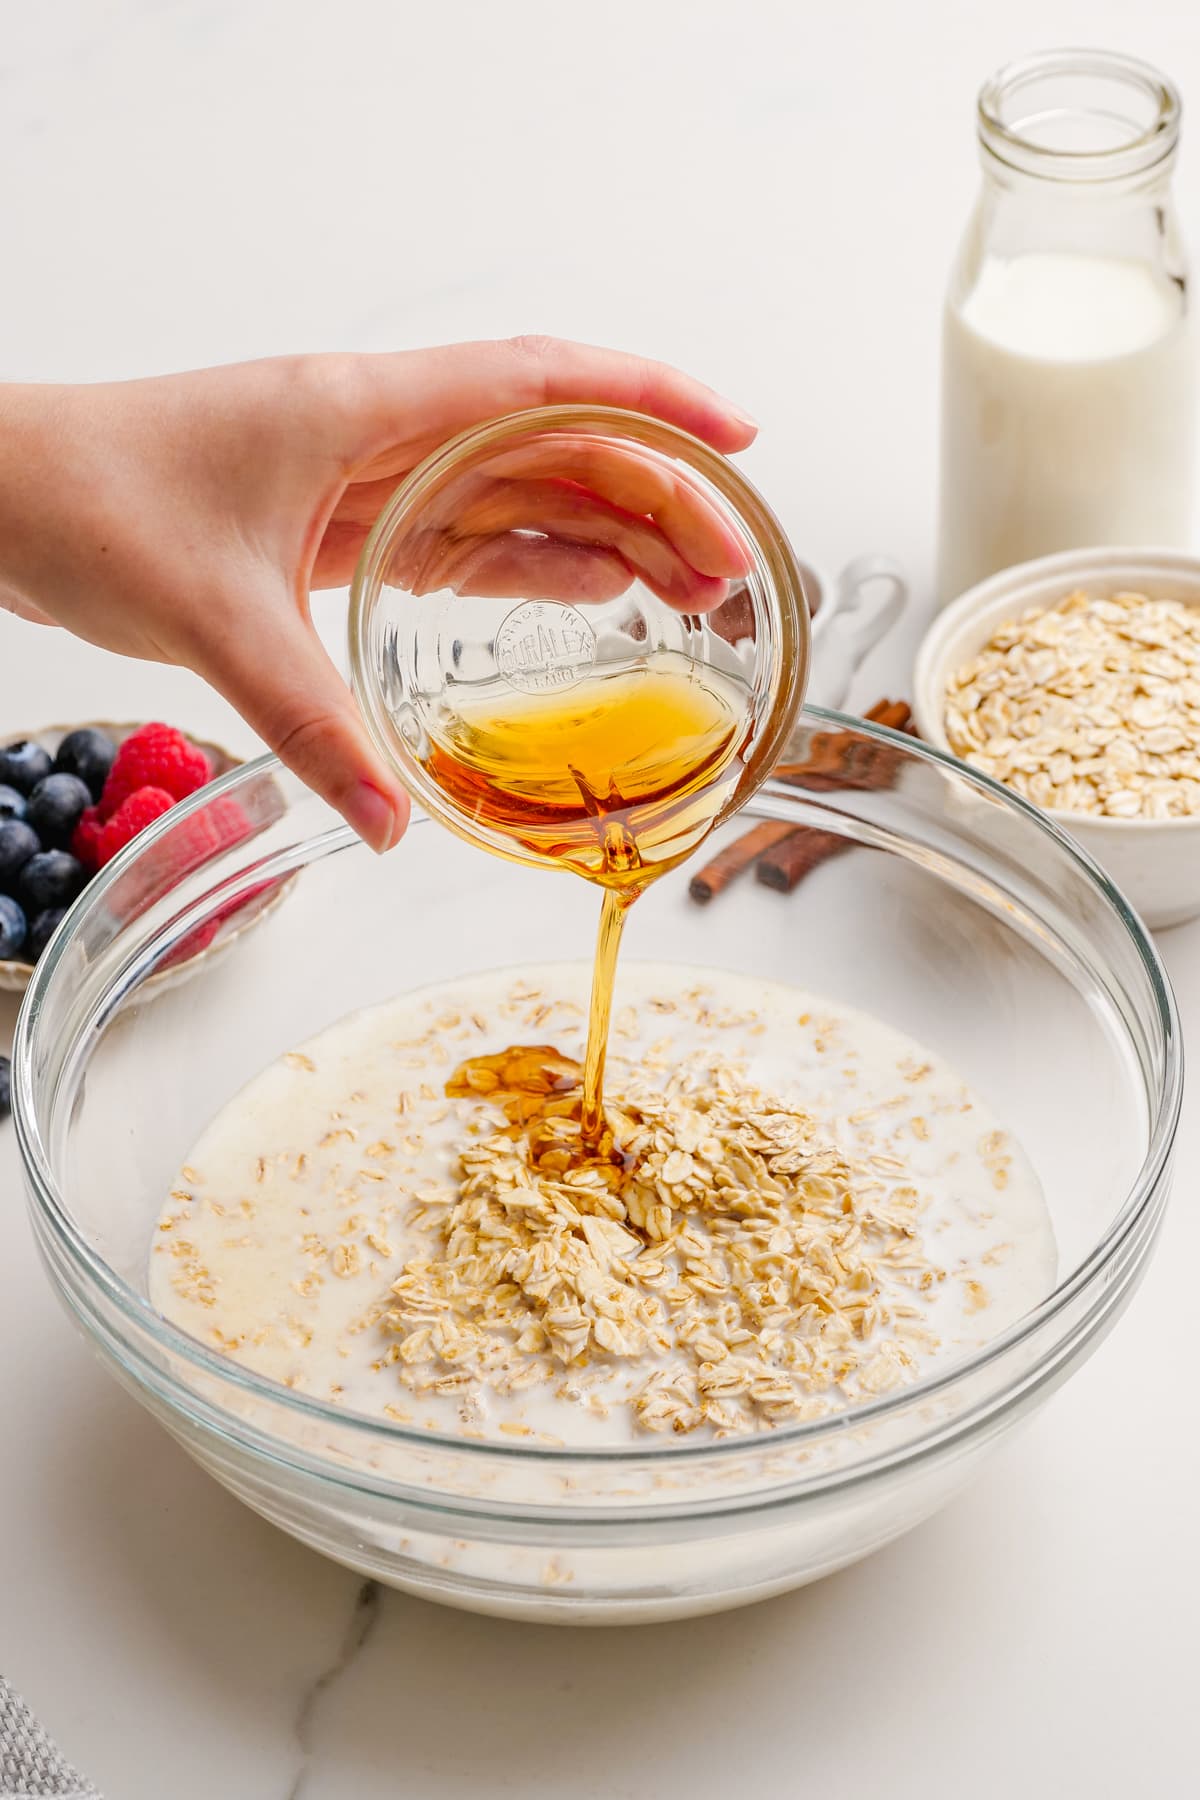 pouring syrup into bowl of oats